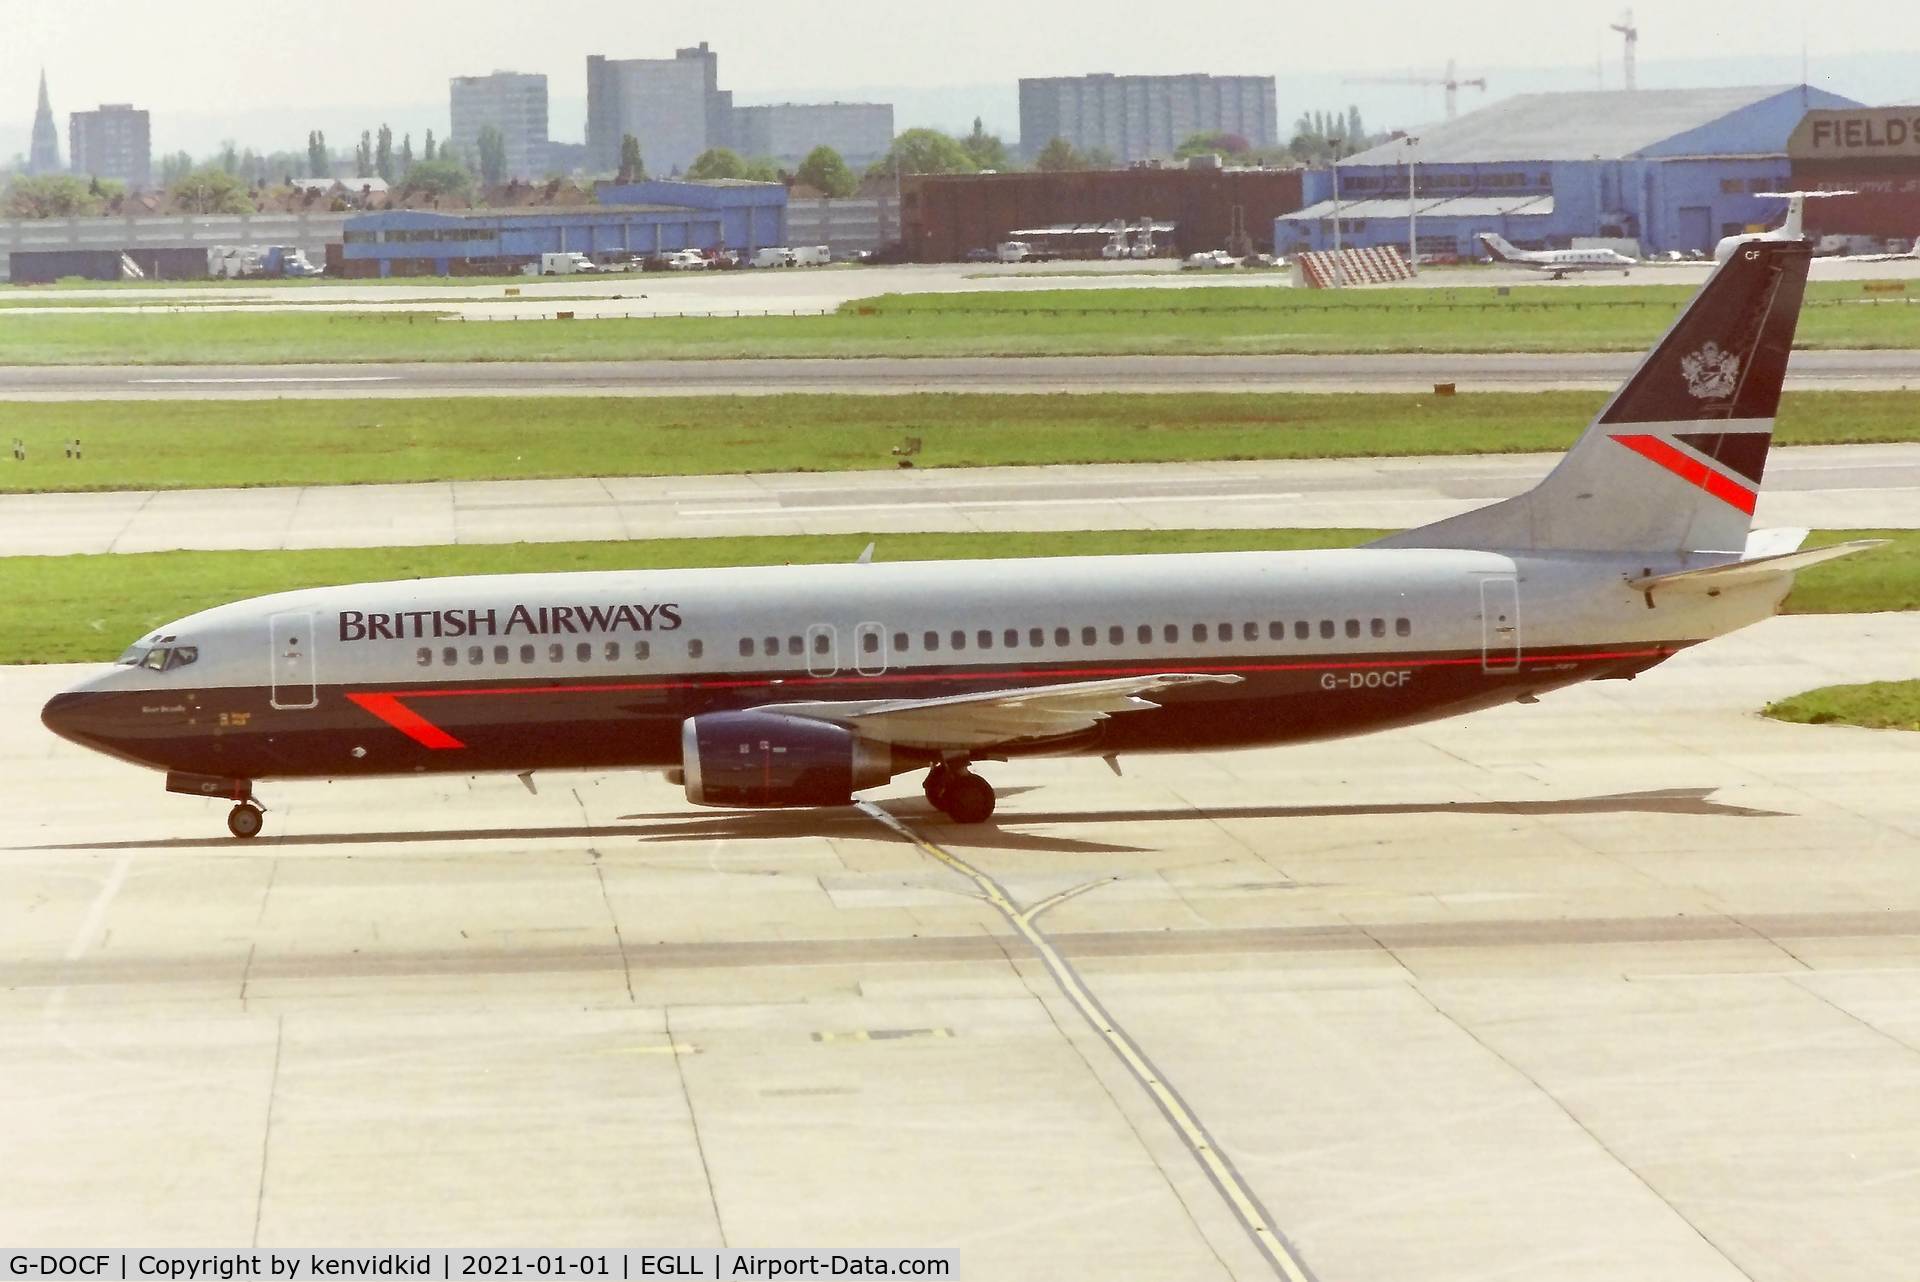 G-DOCF, 1991 Boeing 737-436 C/N 25407, At London Heathrow early 1990''s